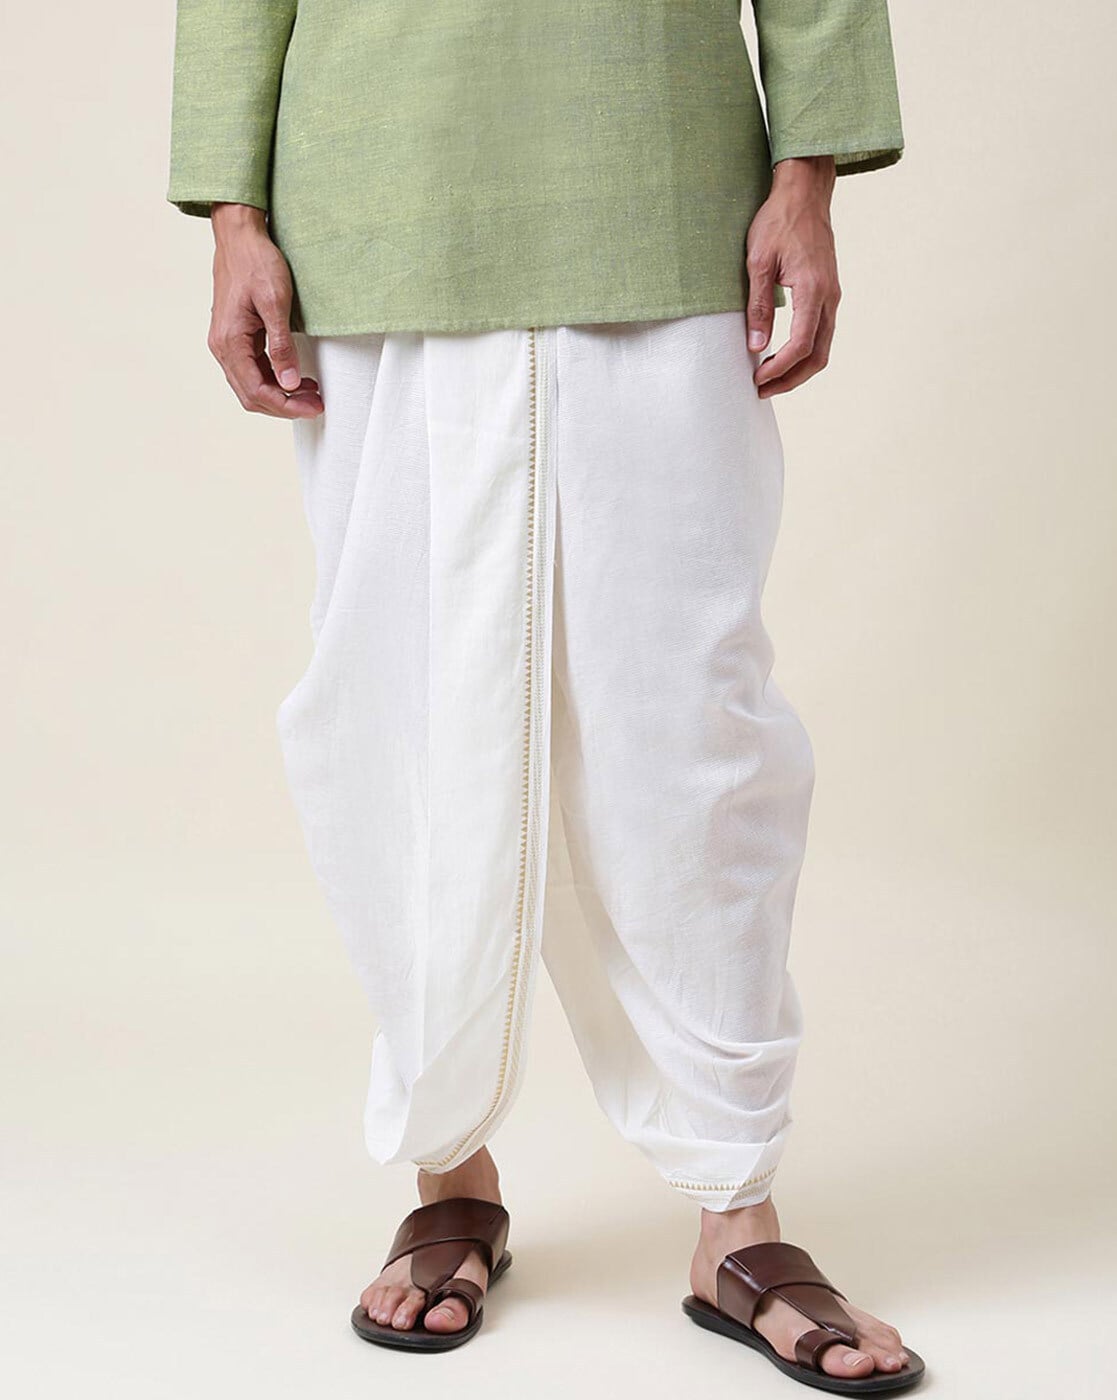 Buy Fab India Dhoti pants online - Women - 6 products | FASHIOLA.in